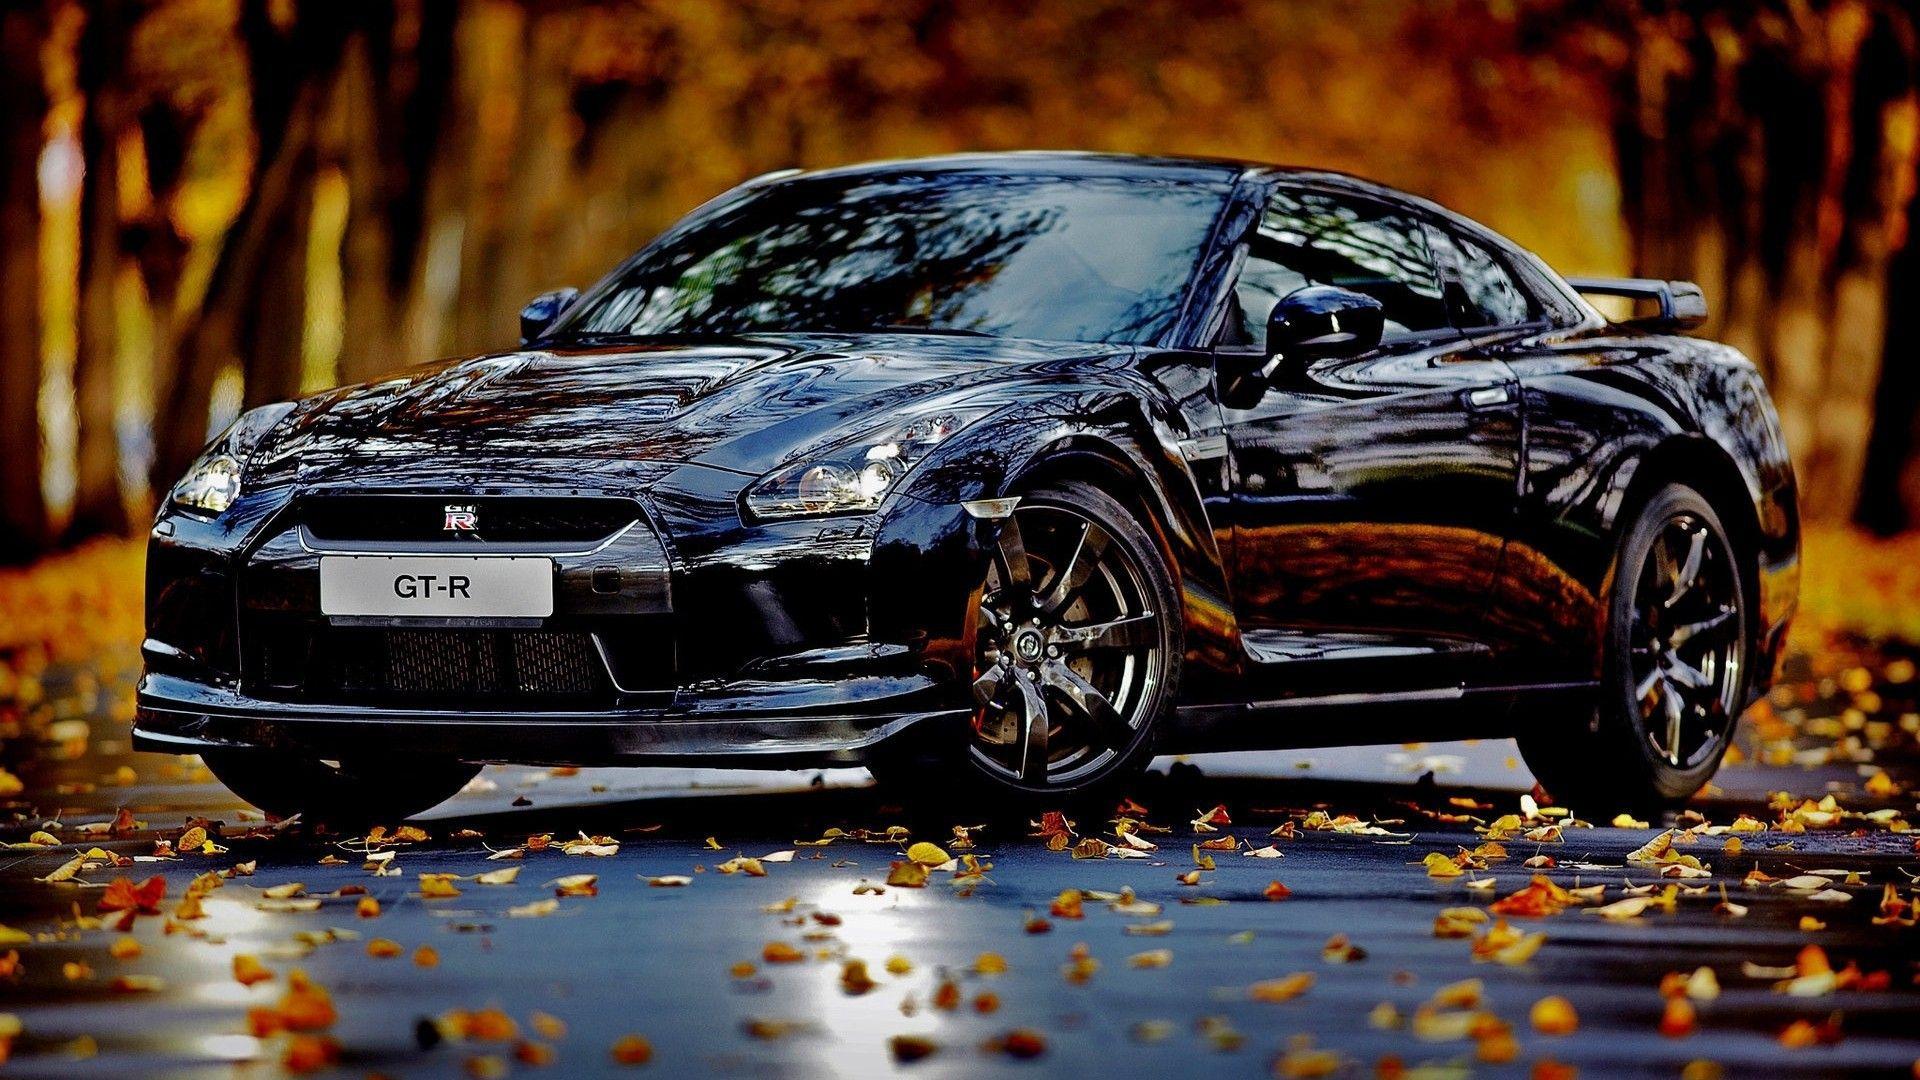 Japanese car Nissan wallpaper and image, picture, photo